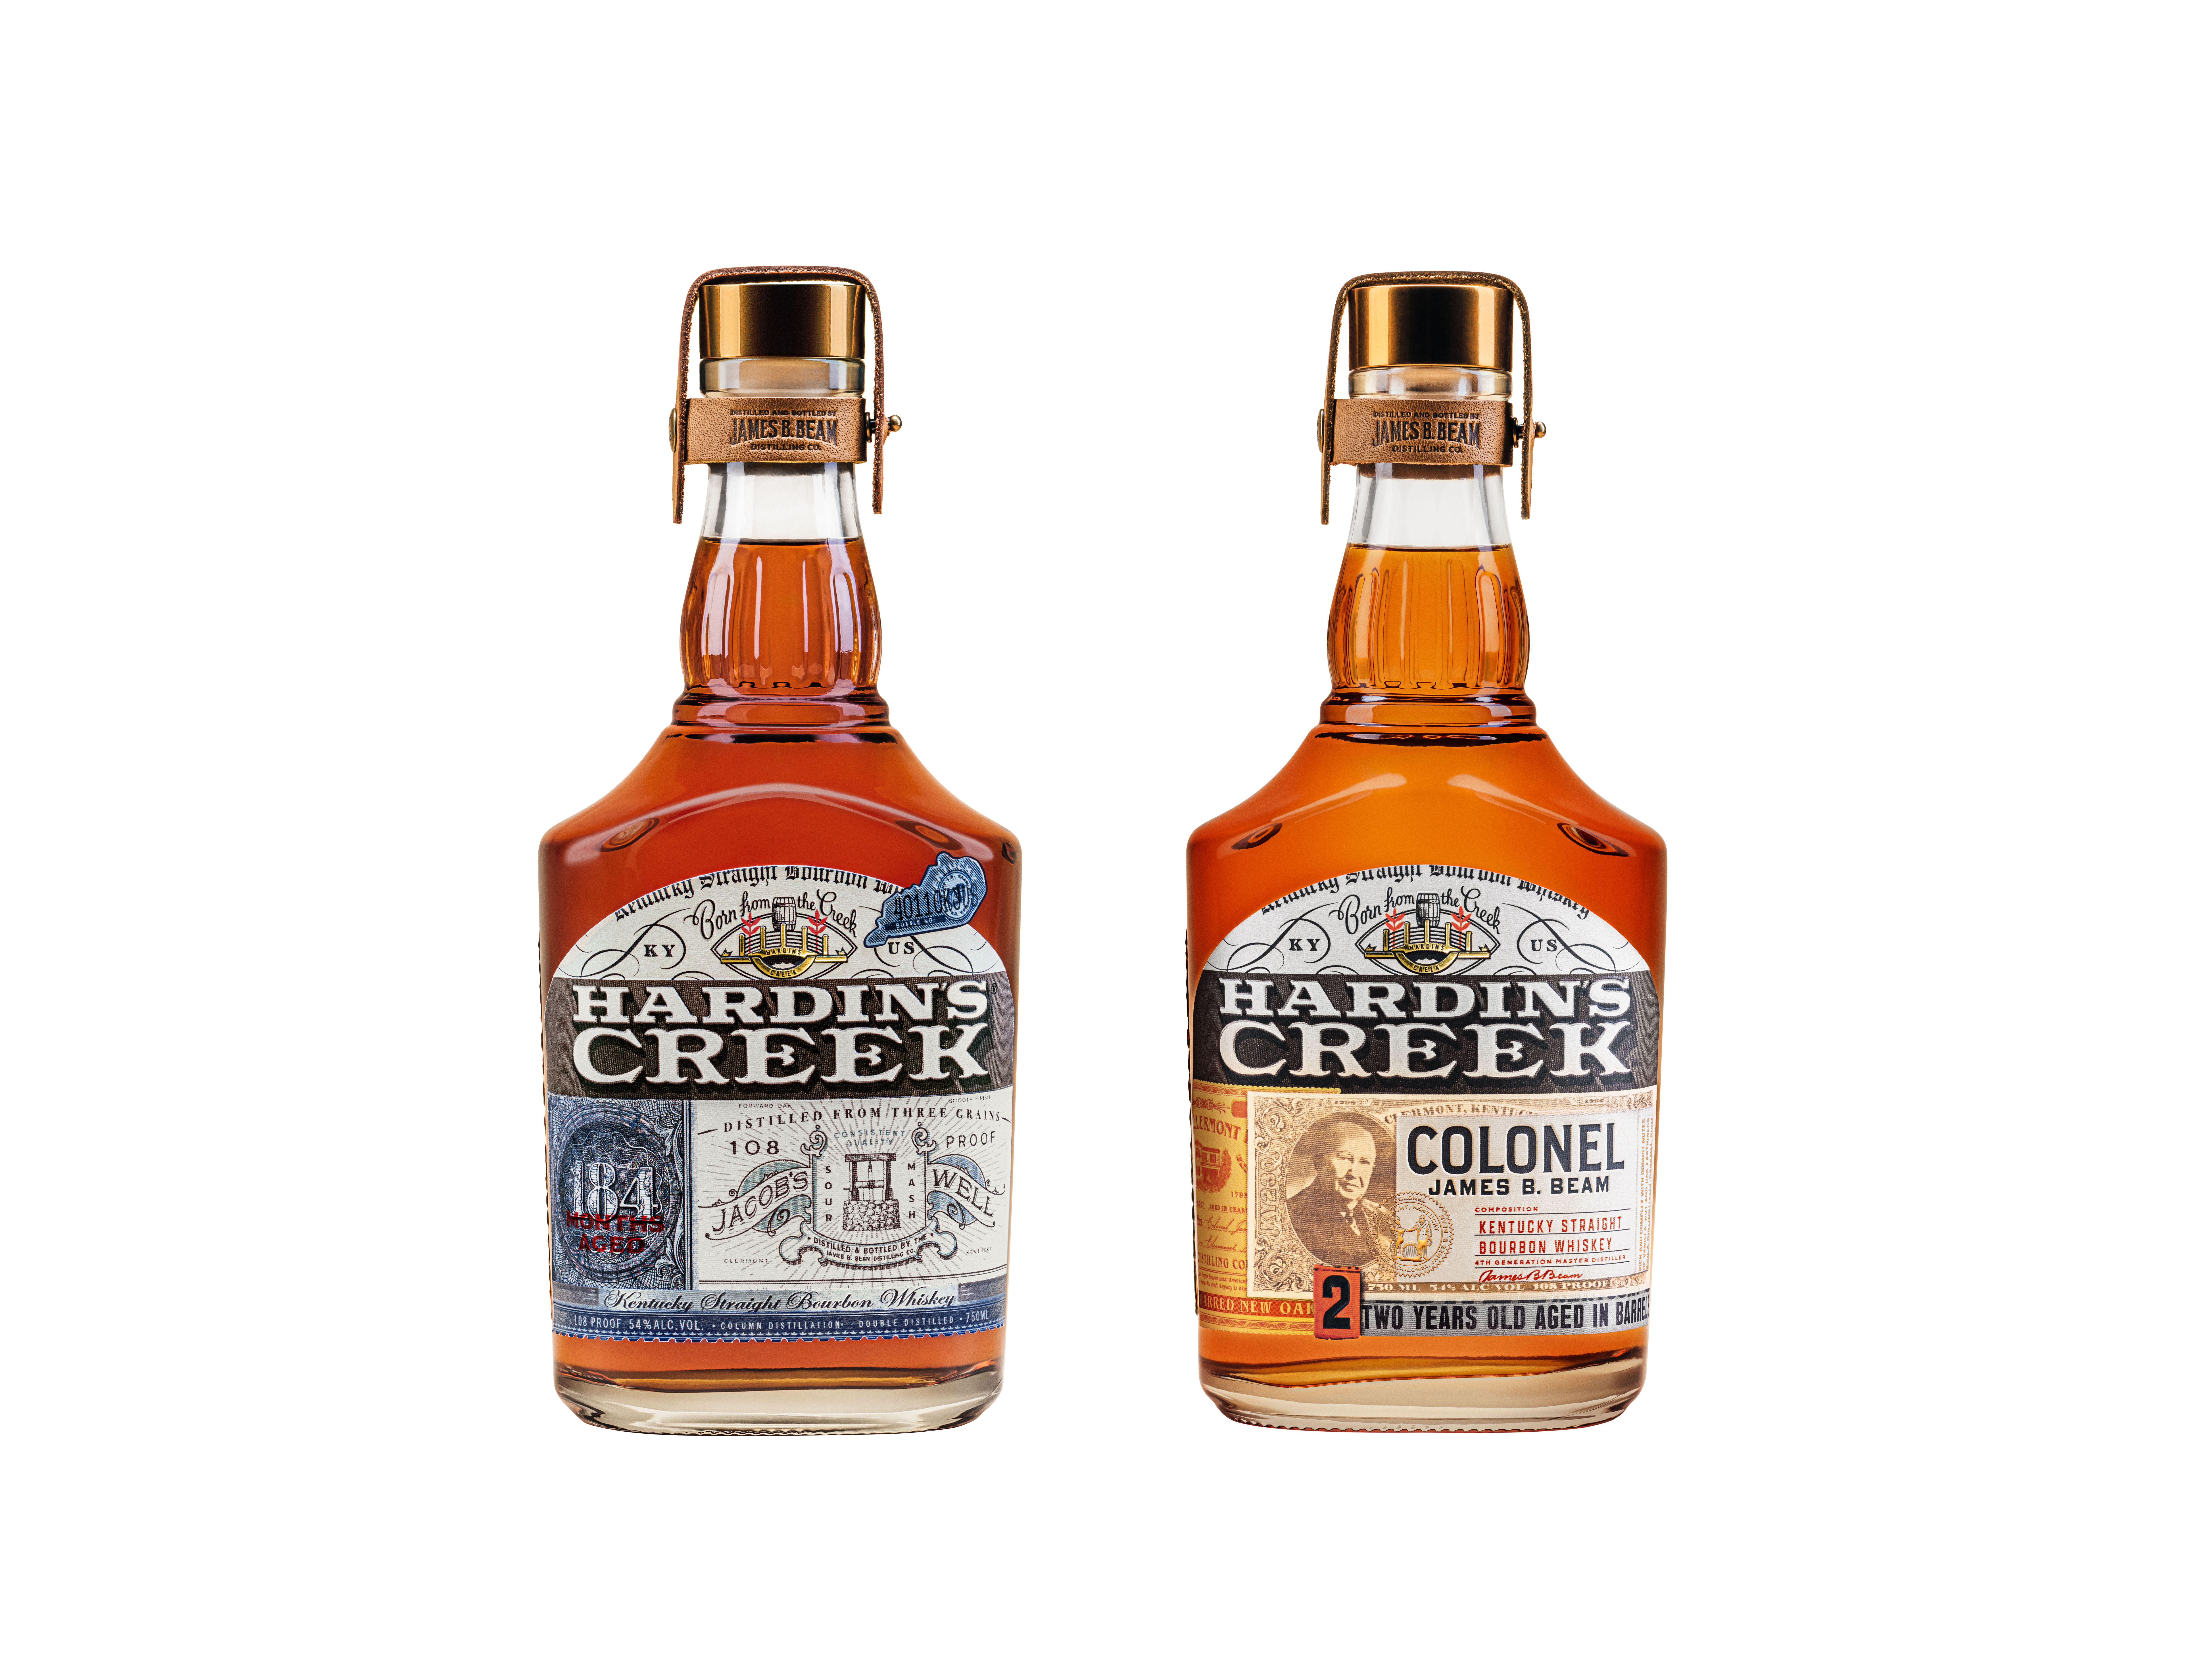 Jim Beam Hardin’s Creek whiskey, a new series of annual releases.